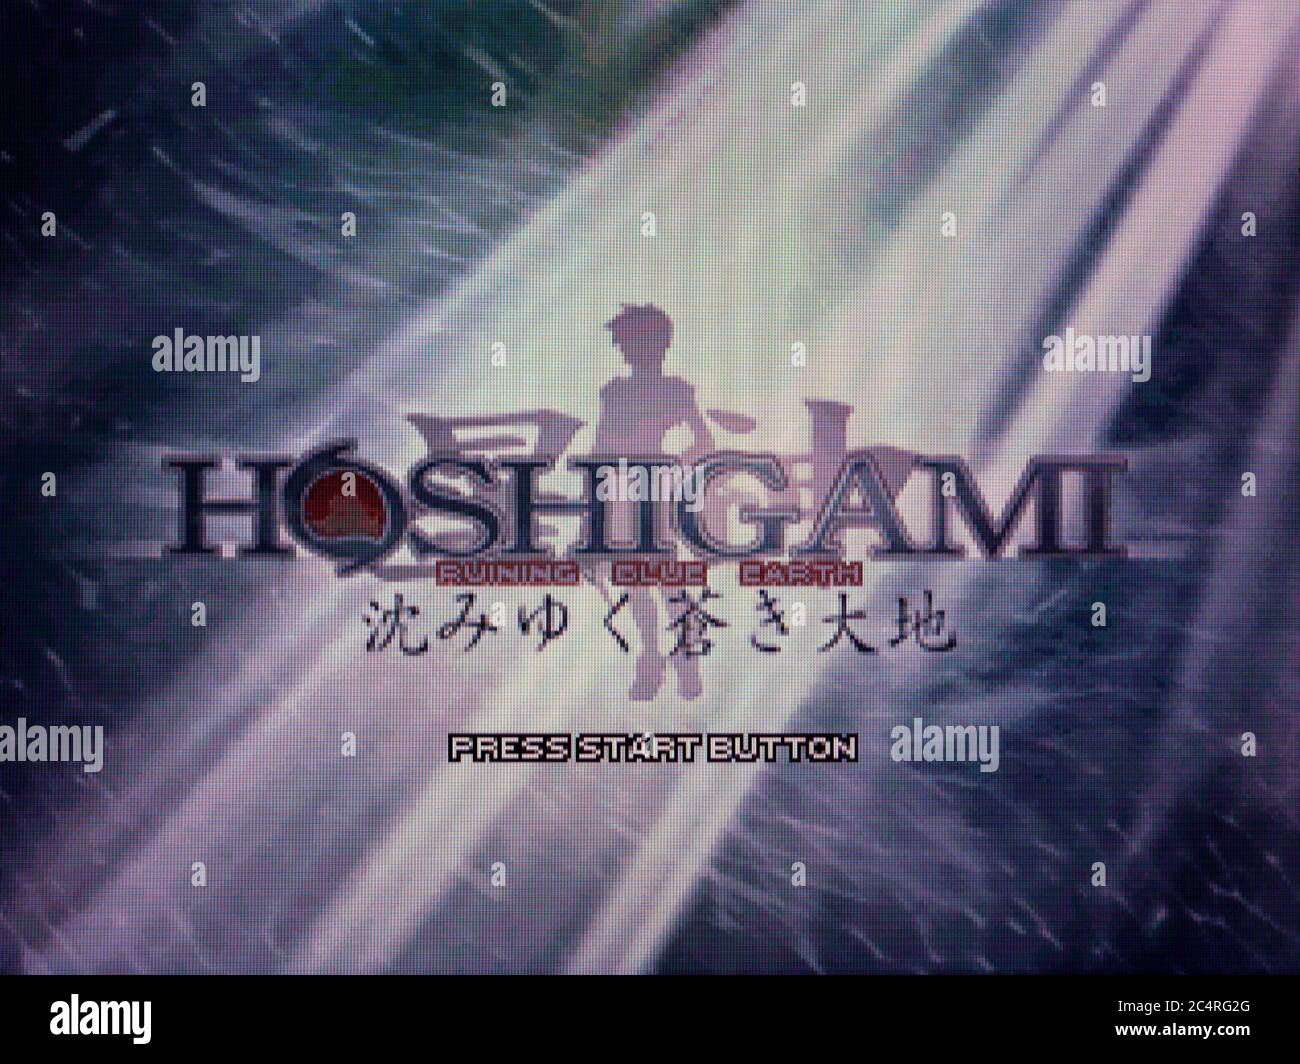 Hoshigami - Ruining Blue Earth - Sony Playstation 1 PS1 PSX - Editorial use only Stock Photo